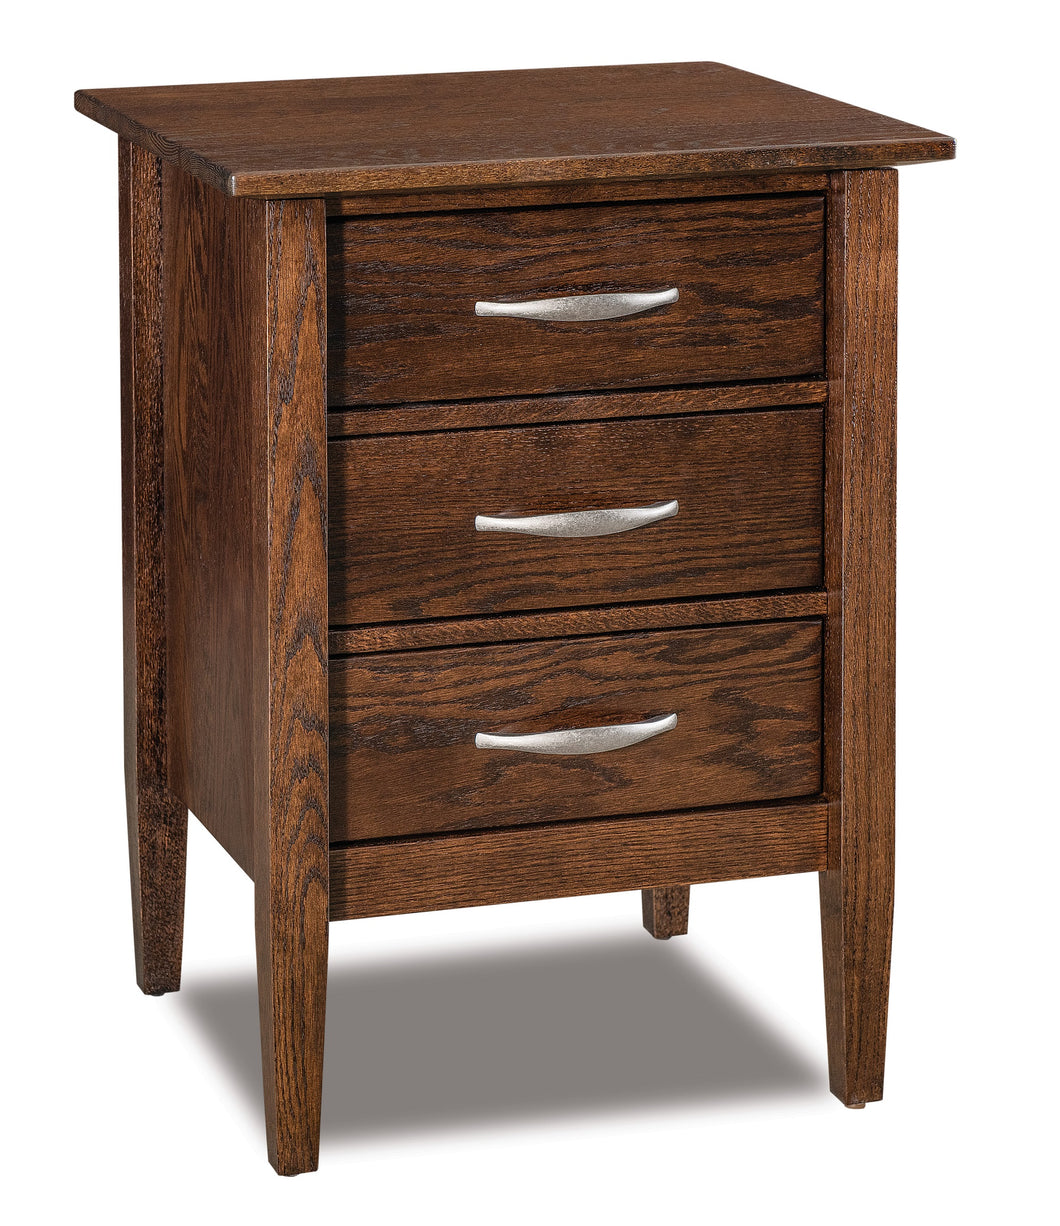 Imperial Nightstand